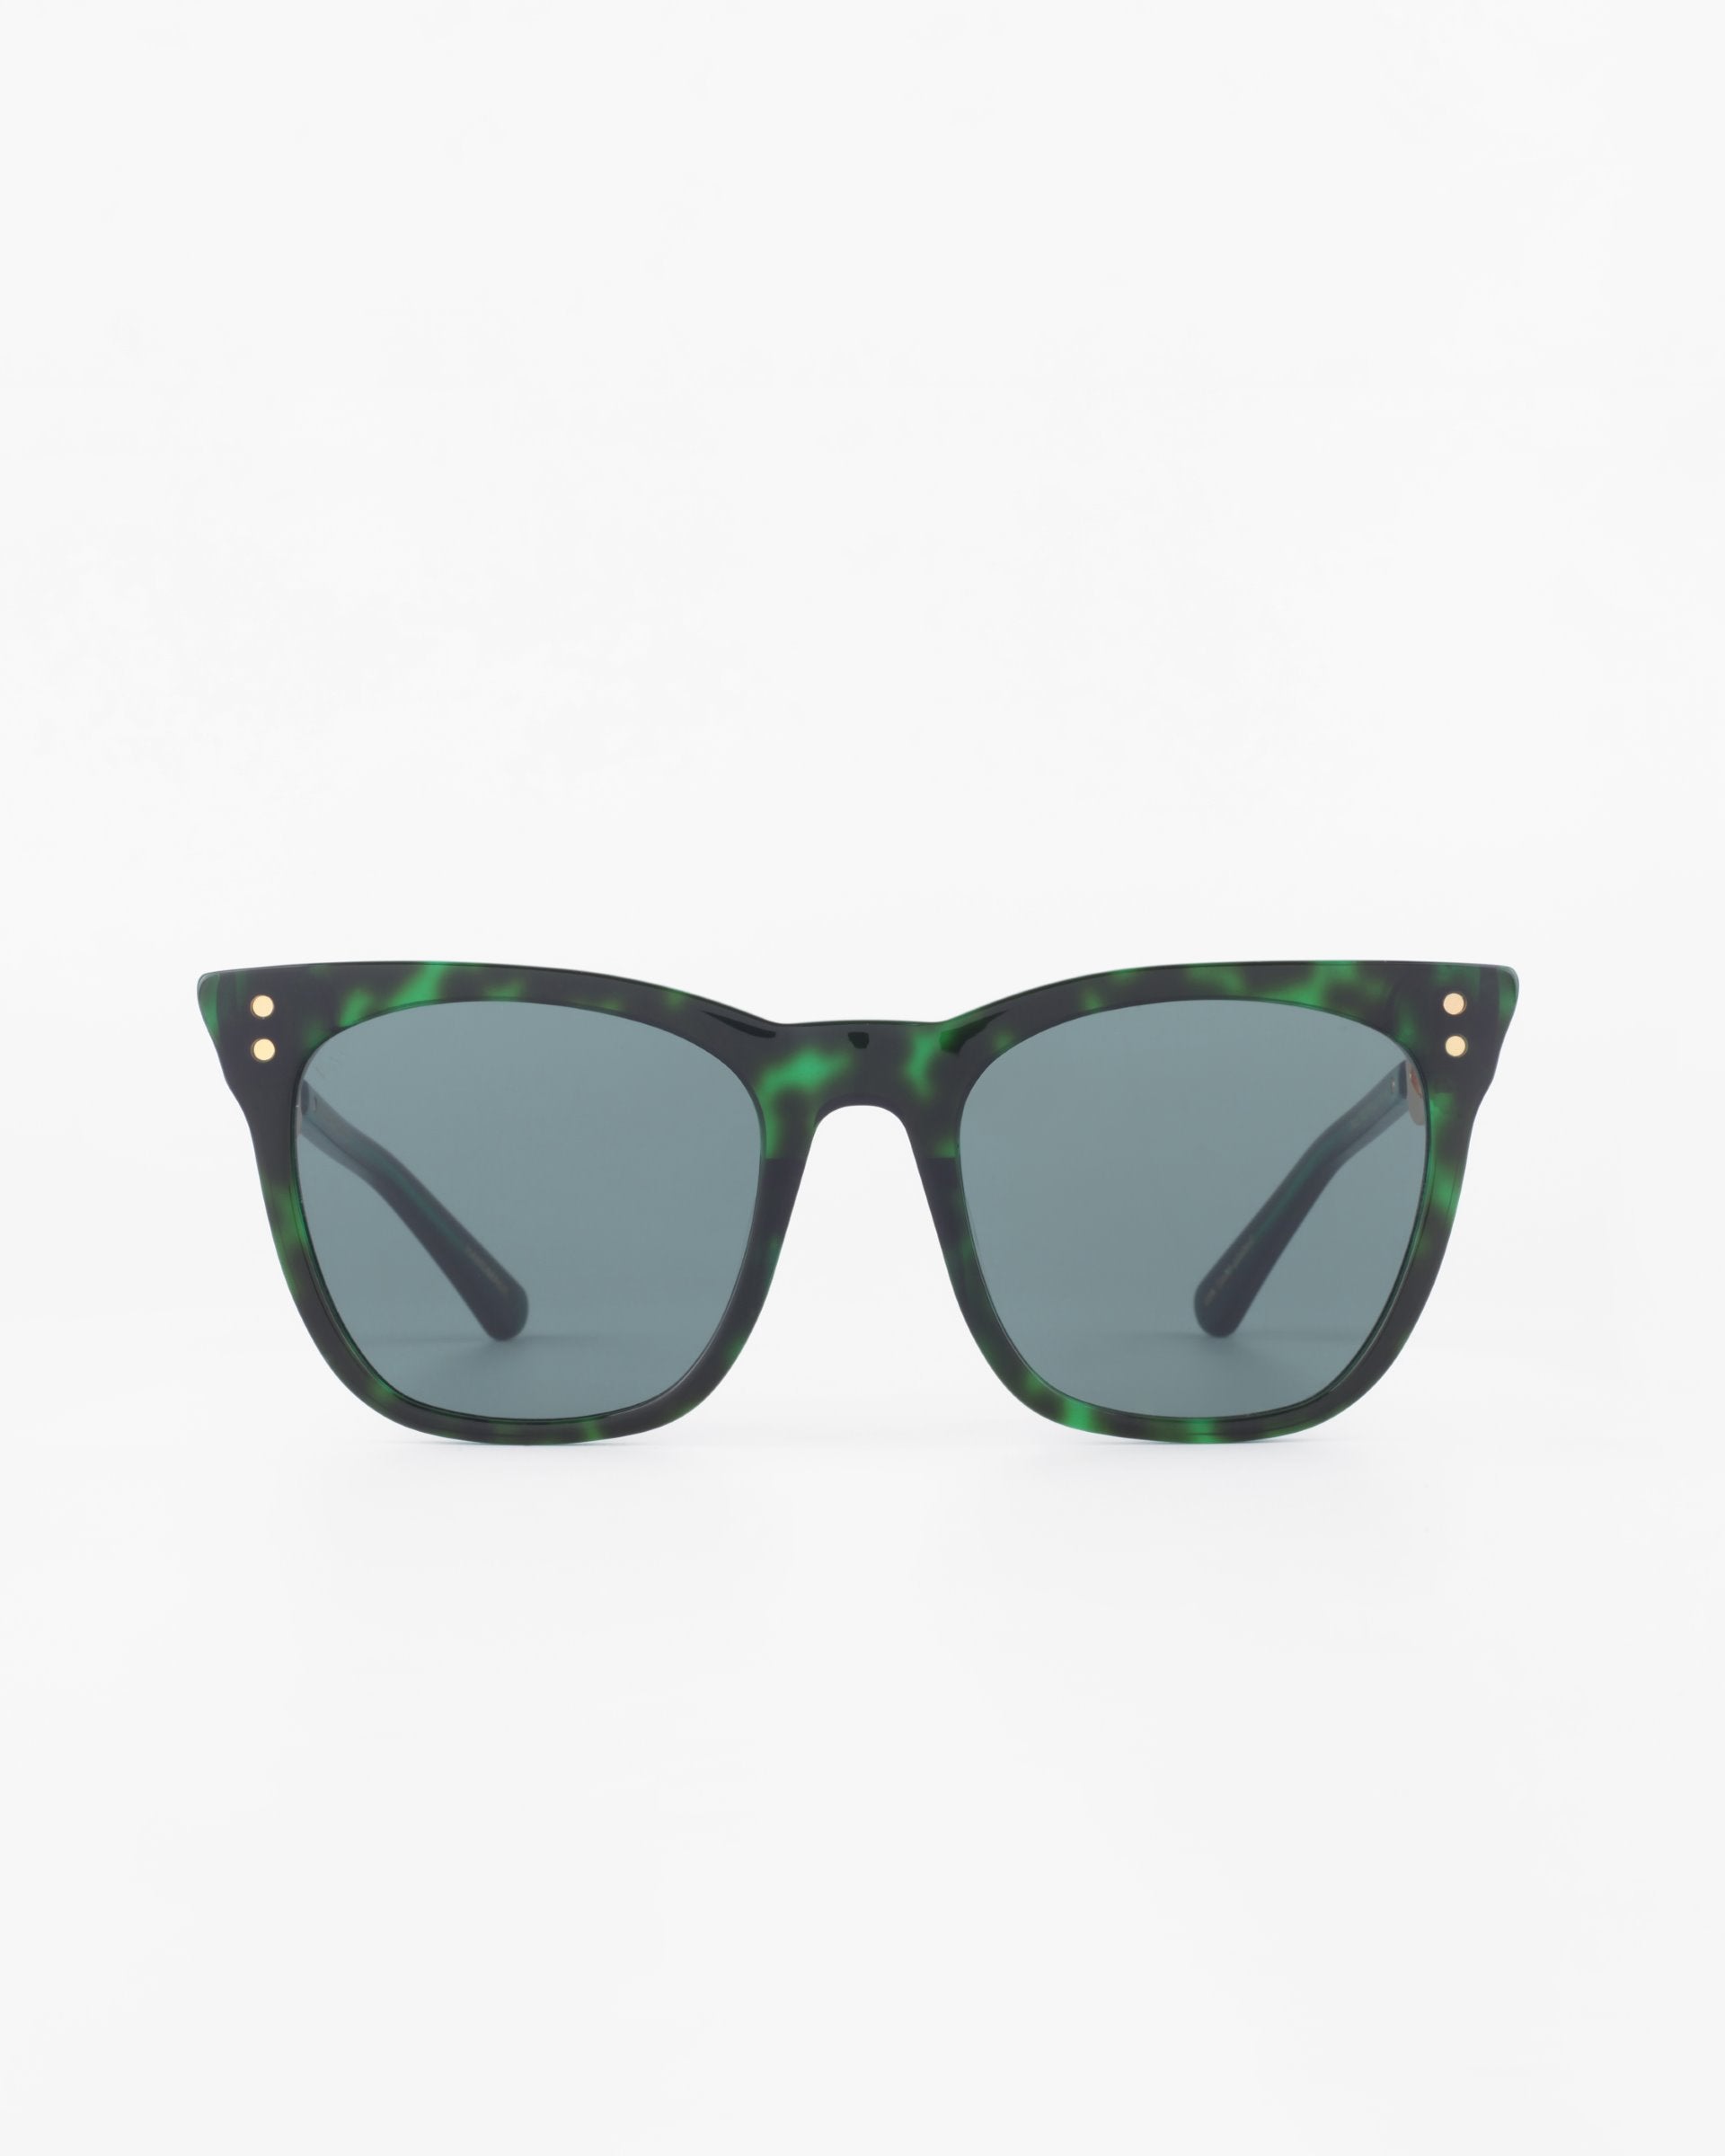 A pair of green tortoiseshell-patterned Deco sunglasses by For Art&#39;s Sake® with a square frame and dark lenses is centered against a plain white background. The acetate temples have small gold accents near the hinges.